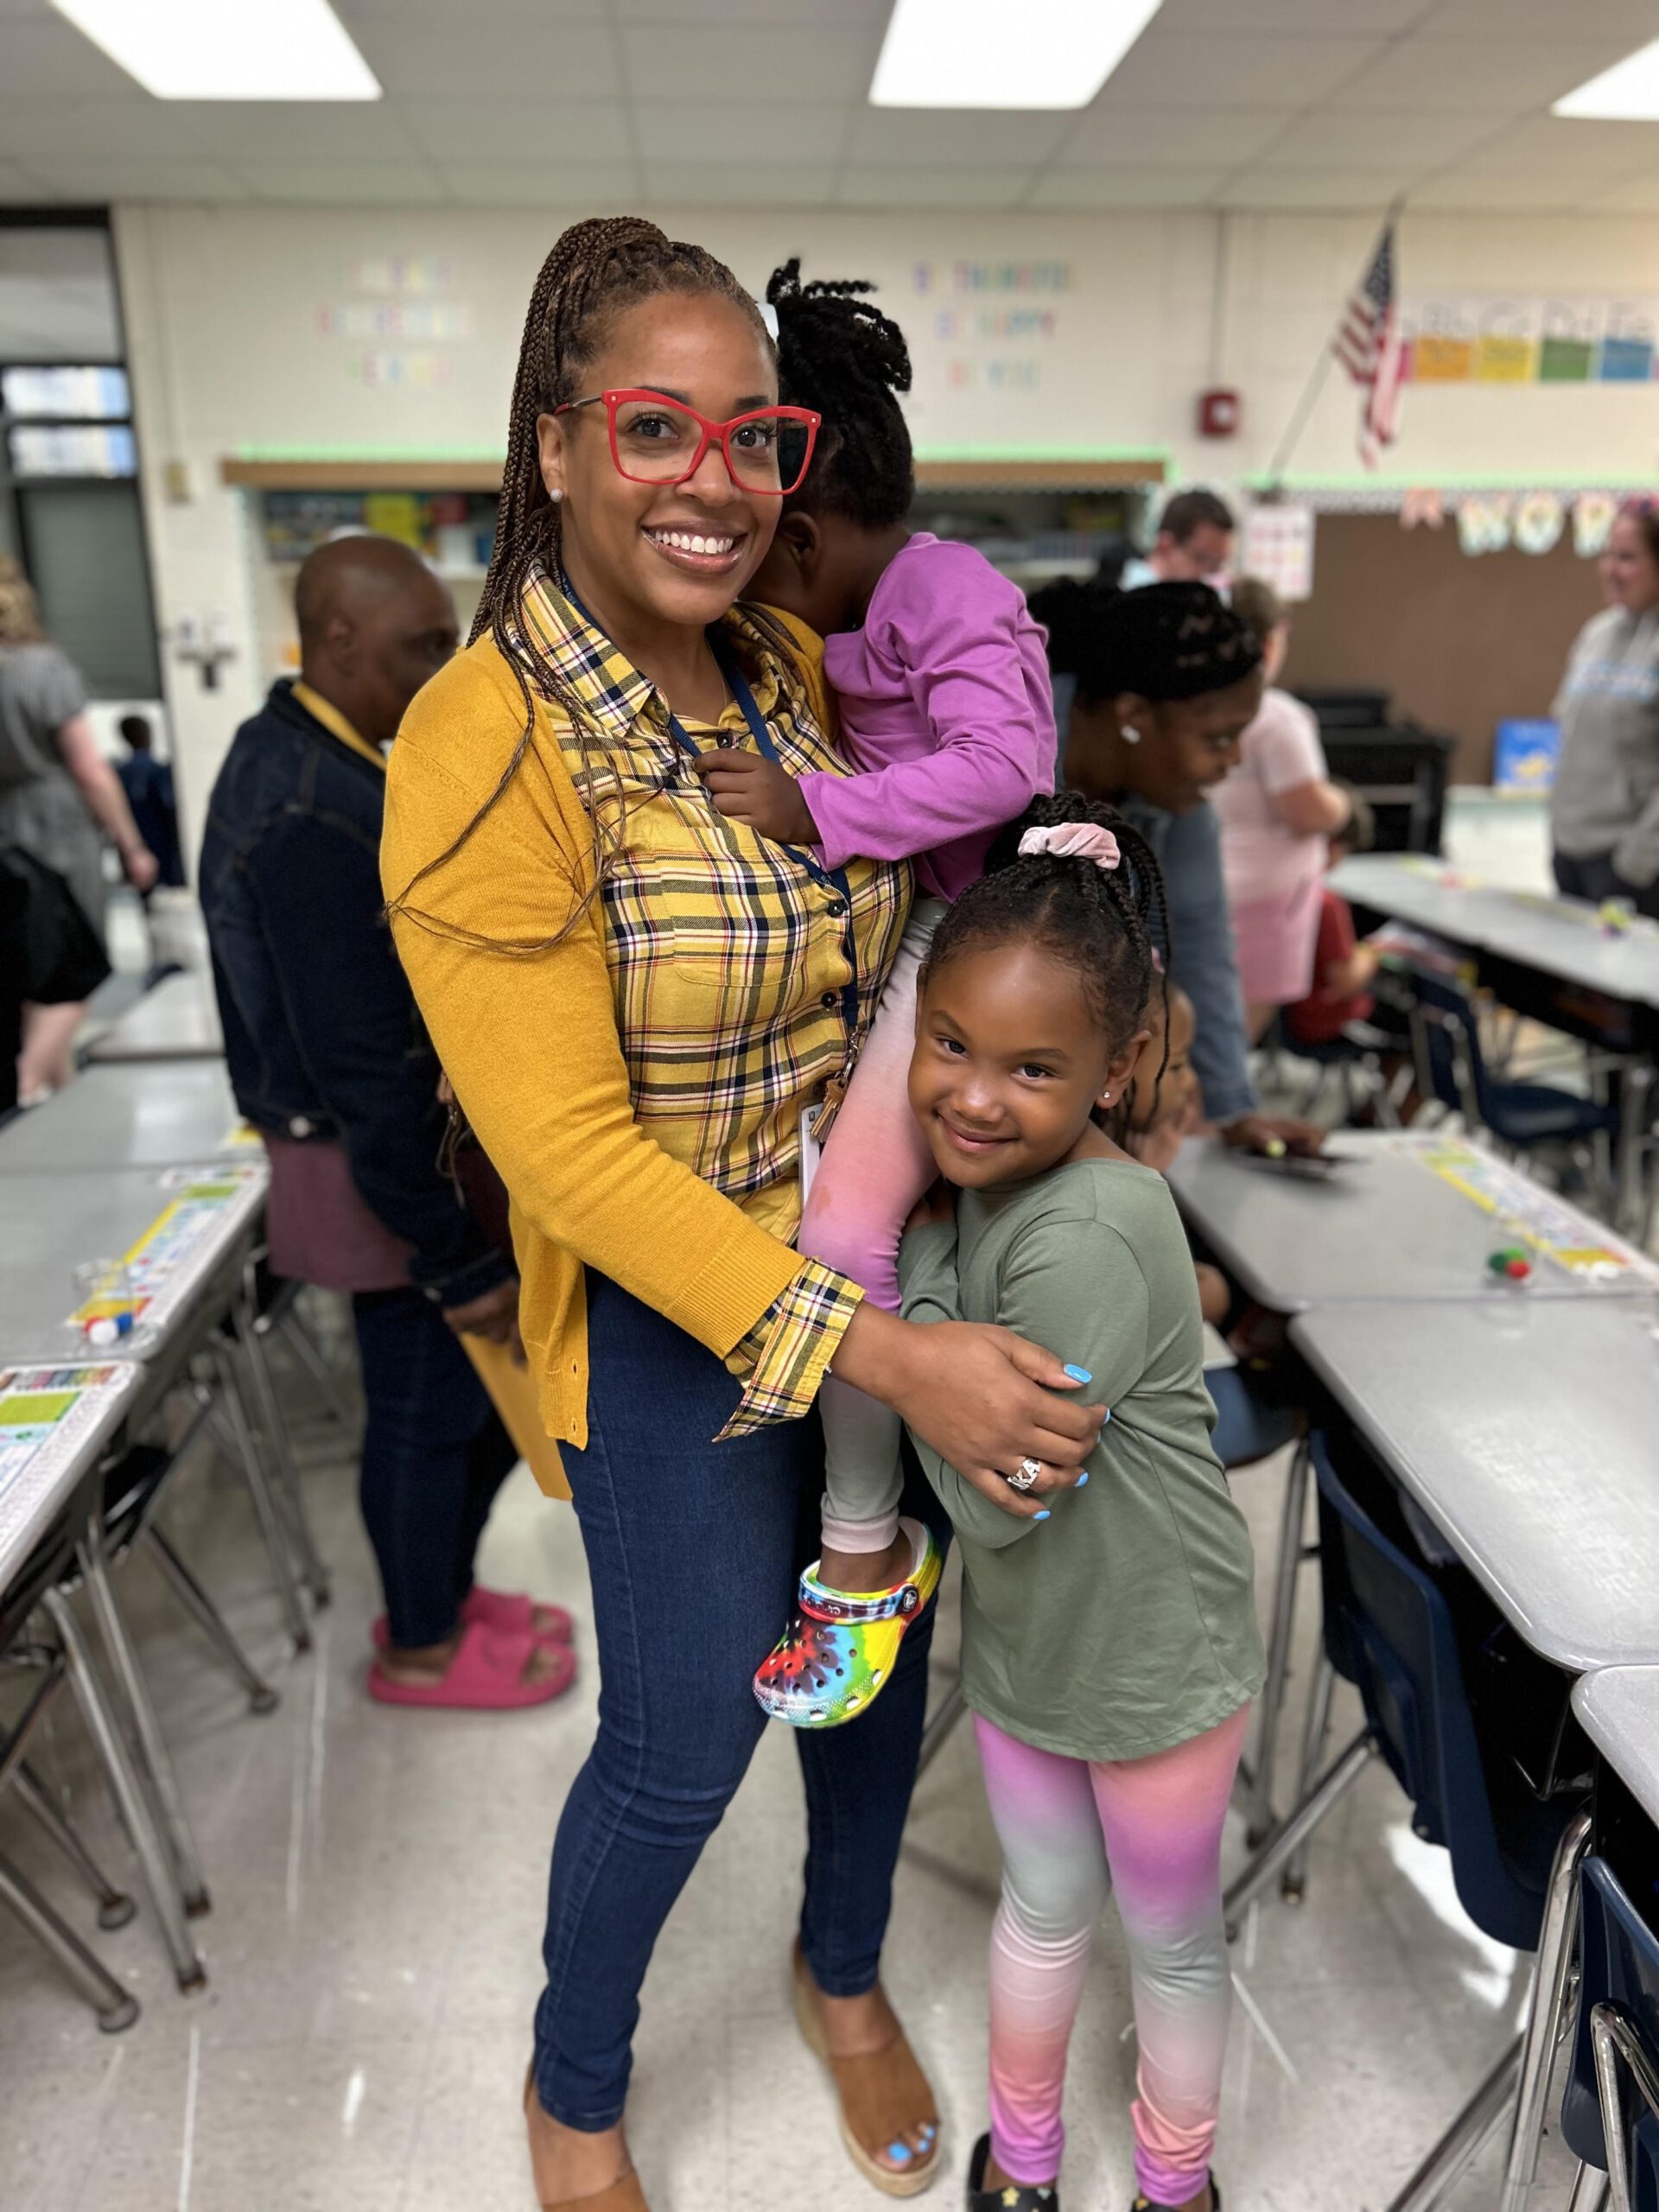 Photo shows Principal Miracle Moss with her two kids in a school classroom. She is holding her youngest child, who is hiding her face from the camera. Her other child is next to her leg, side-hugging her and smiling at the camera. Moss is also smiling at the camera. In the background, you can see elementary school desks and other adults and children moving through the space.